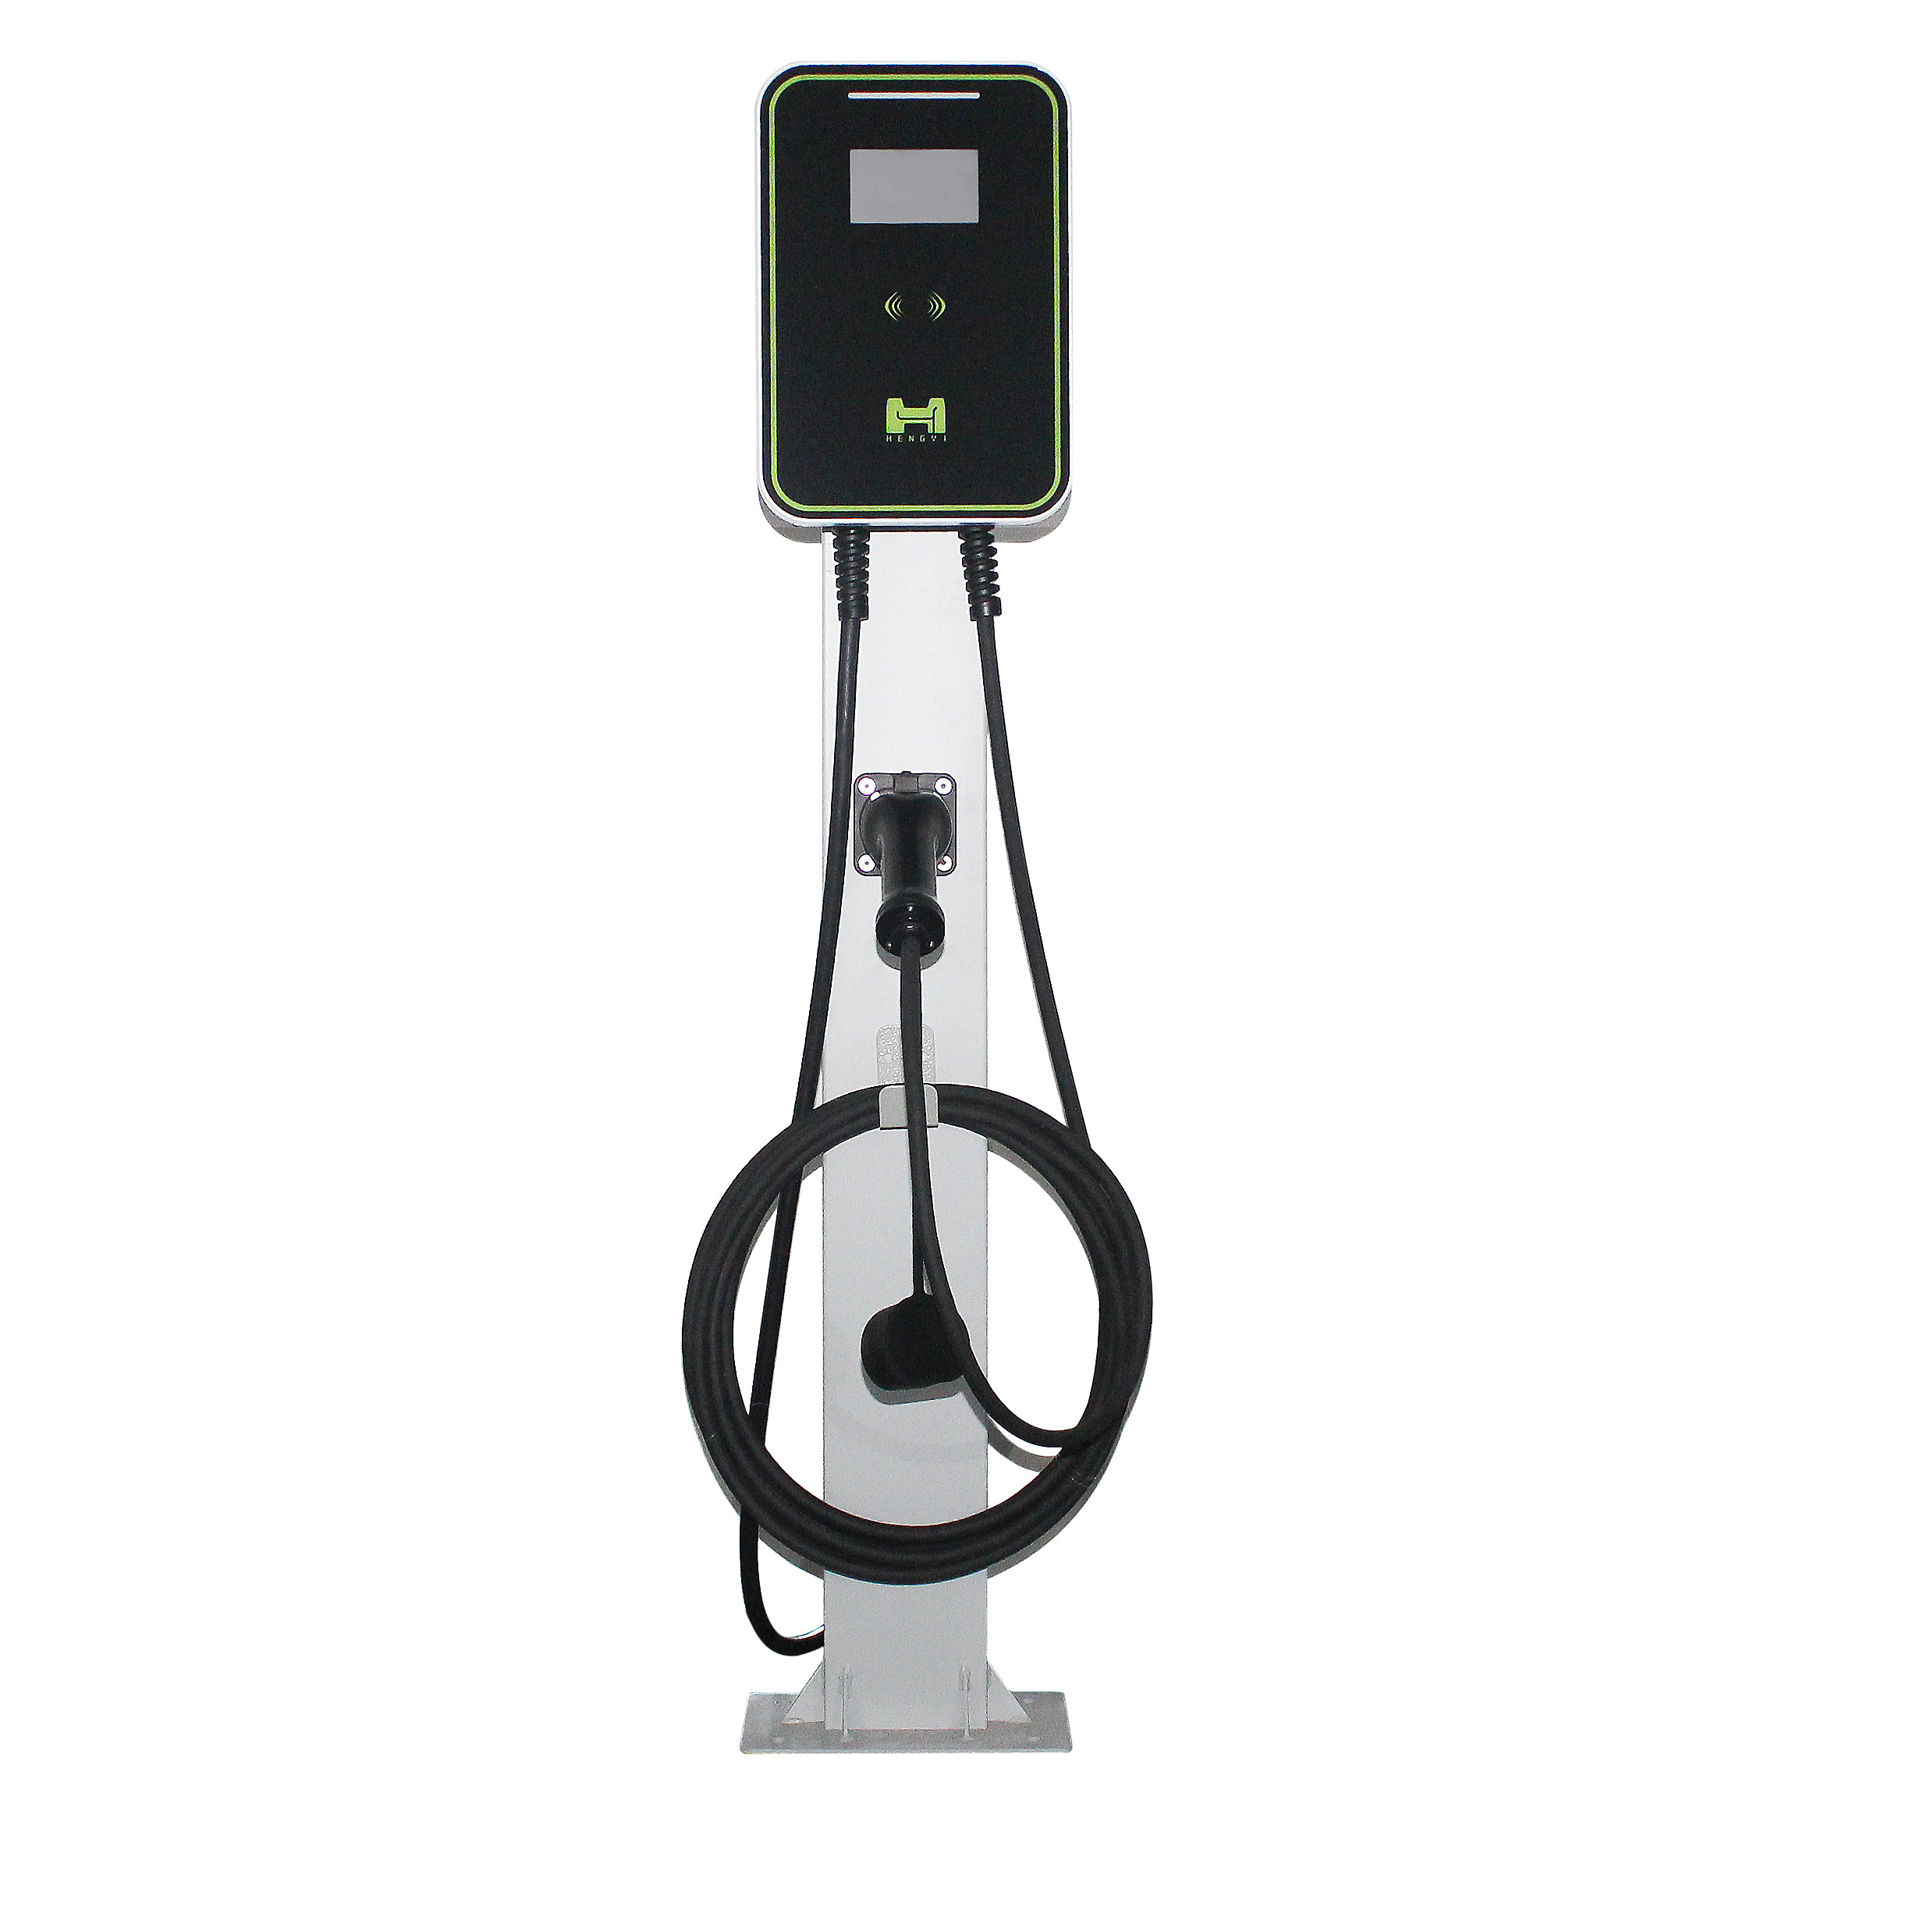 11KW 16A wallmounted home use ev charger with type 2 charging cable (2)